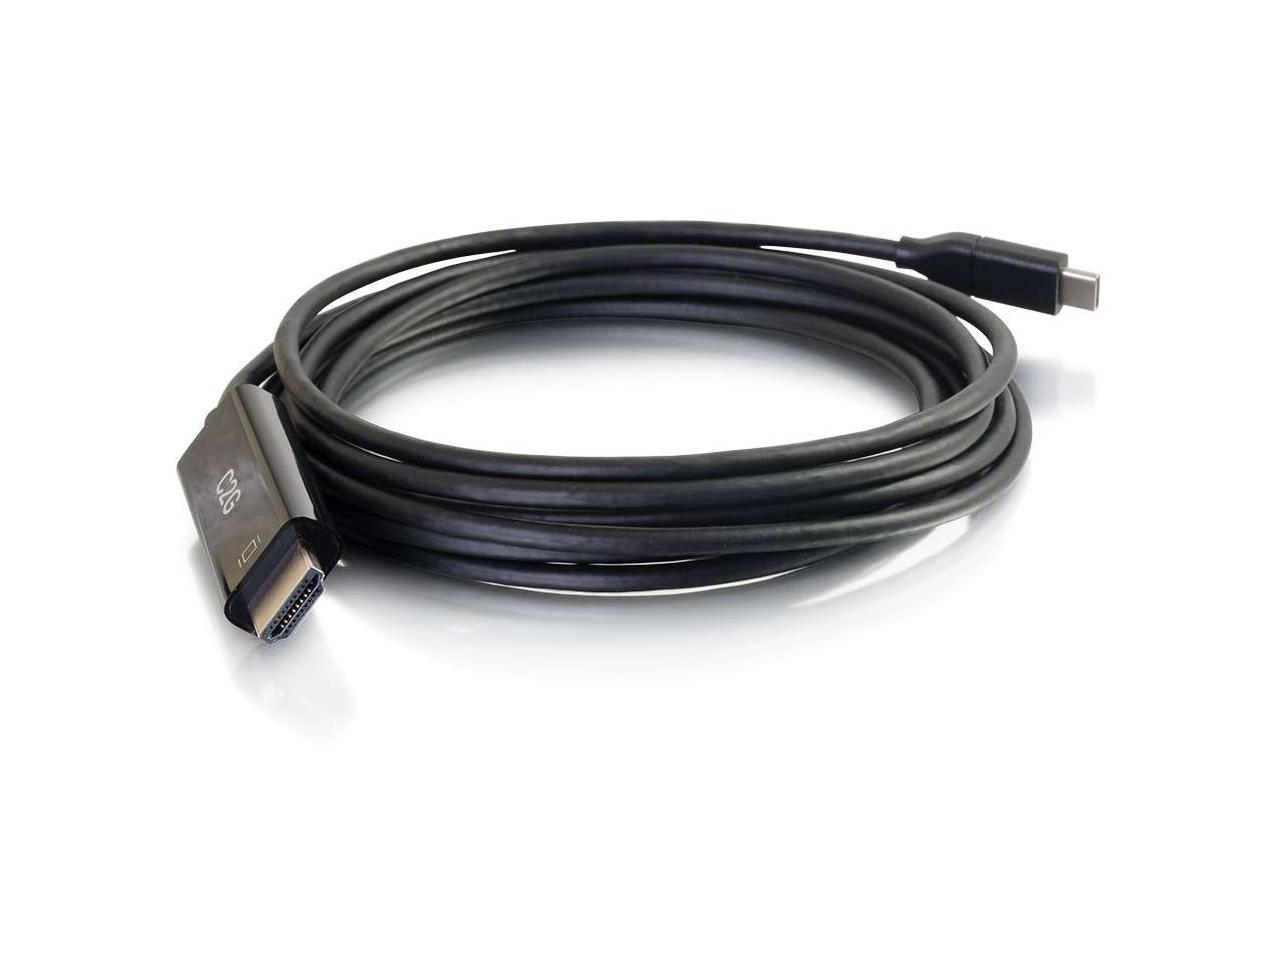 C2g 10Ft Usb-C To Hdmi Audio/Video Adapter Cable - 4K 60Hz - M/M